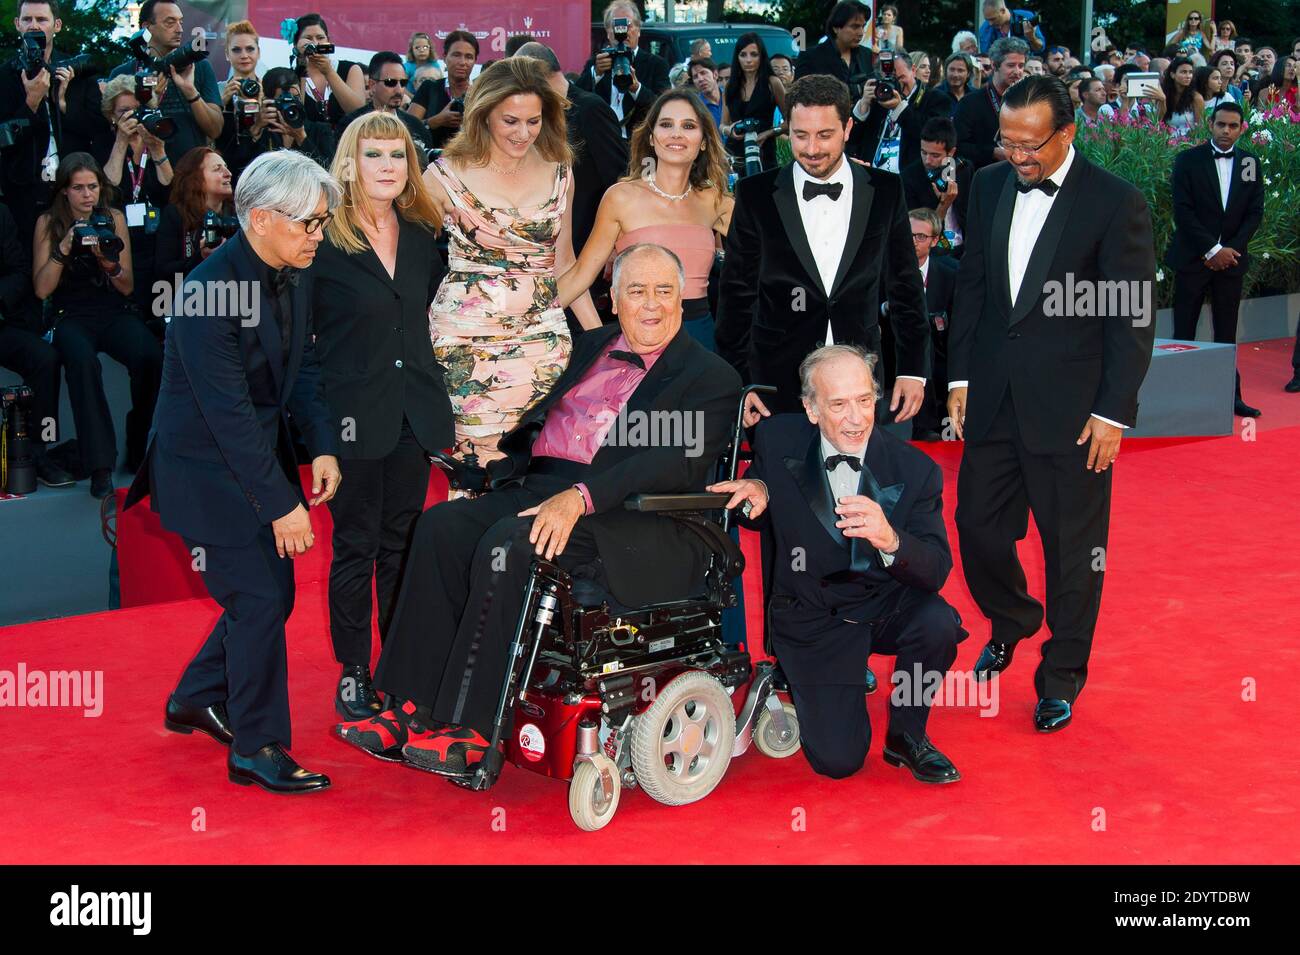 Members of the jury Japanese composer, musician and producer Ryuichi Sakamoto, British director Andrea Arnold, German actress Martina Gedeck, French actress Virginie Ledoyen, Chilean director, screenwriter and producer Pablo Larrain, Chinese actor and director Jiang Wen, Italian director and president of the jury Bernardo Bertolucci and Swiss French director of photography Renato Berta arriving at the closing ceremony of the 70th Venice International Film Festival held at Sala Grande in Venice, Italy on September 7, 2013. Photo by Nicolas Genin/ABACAPRESS.COM Stock Photo